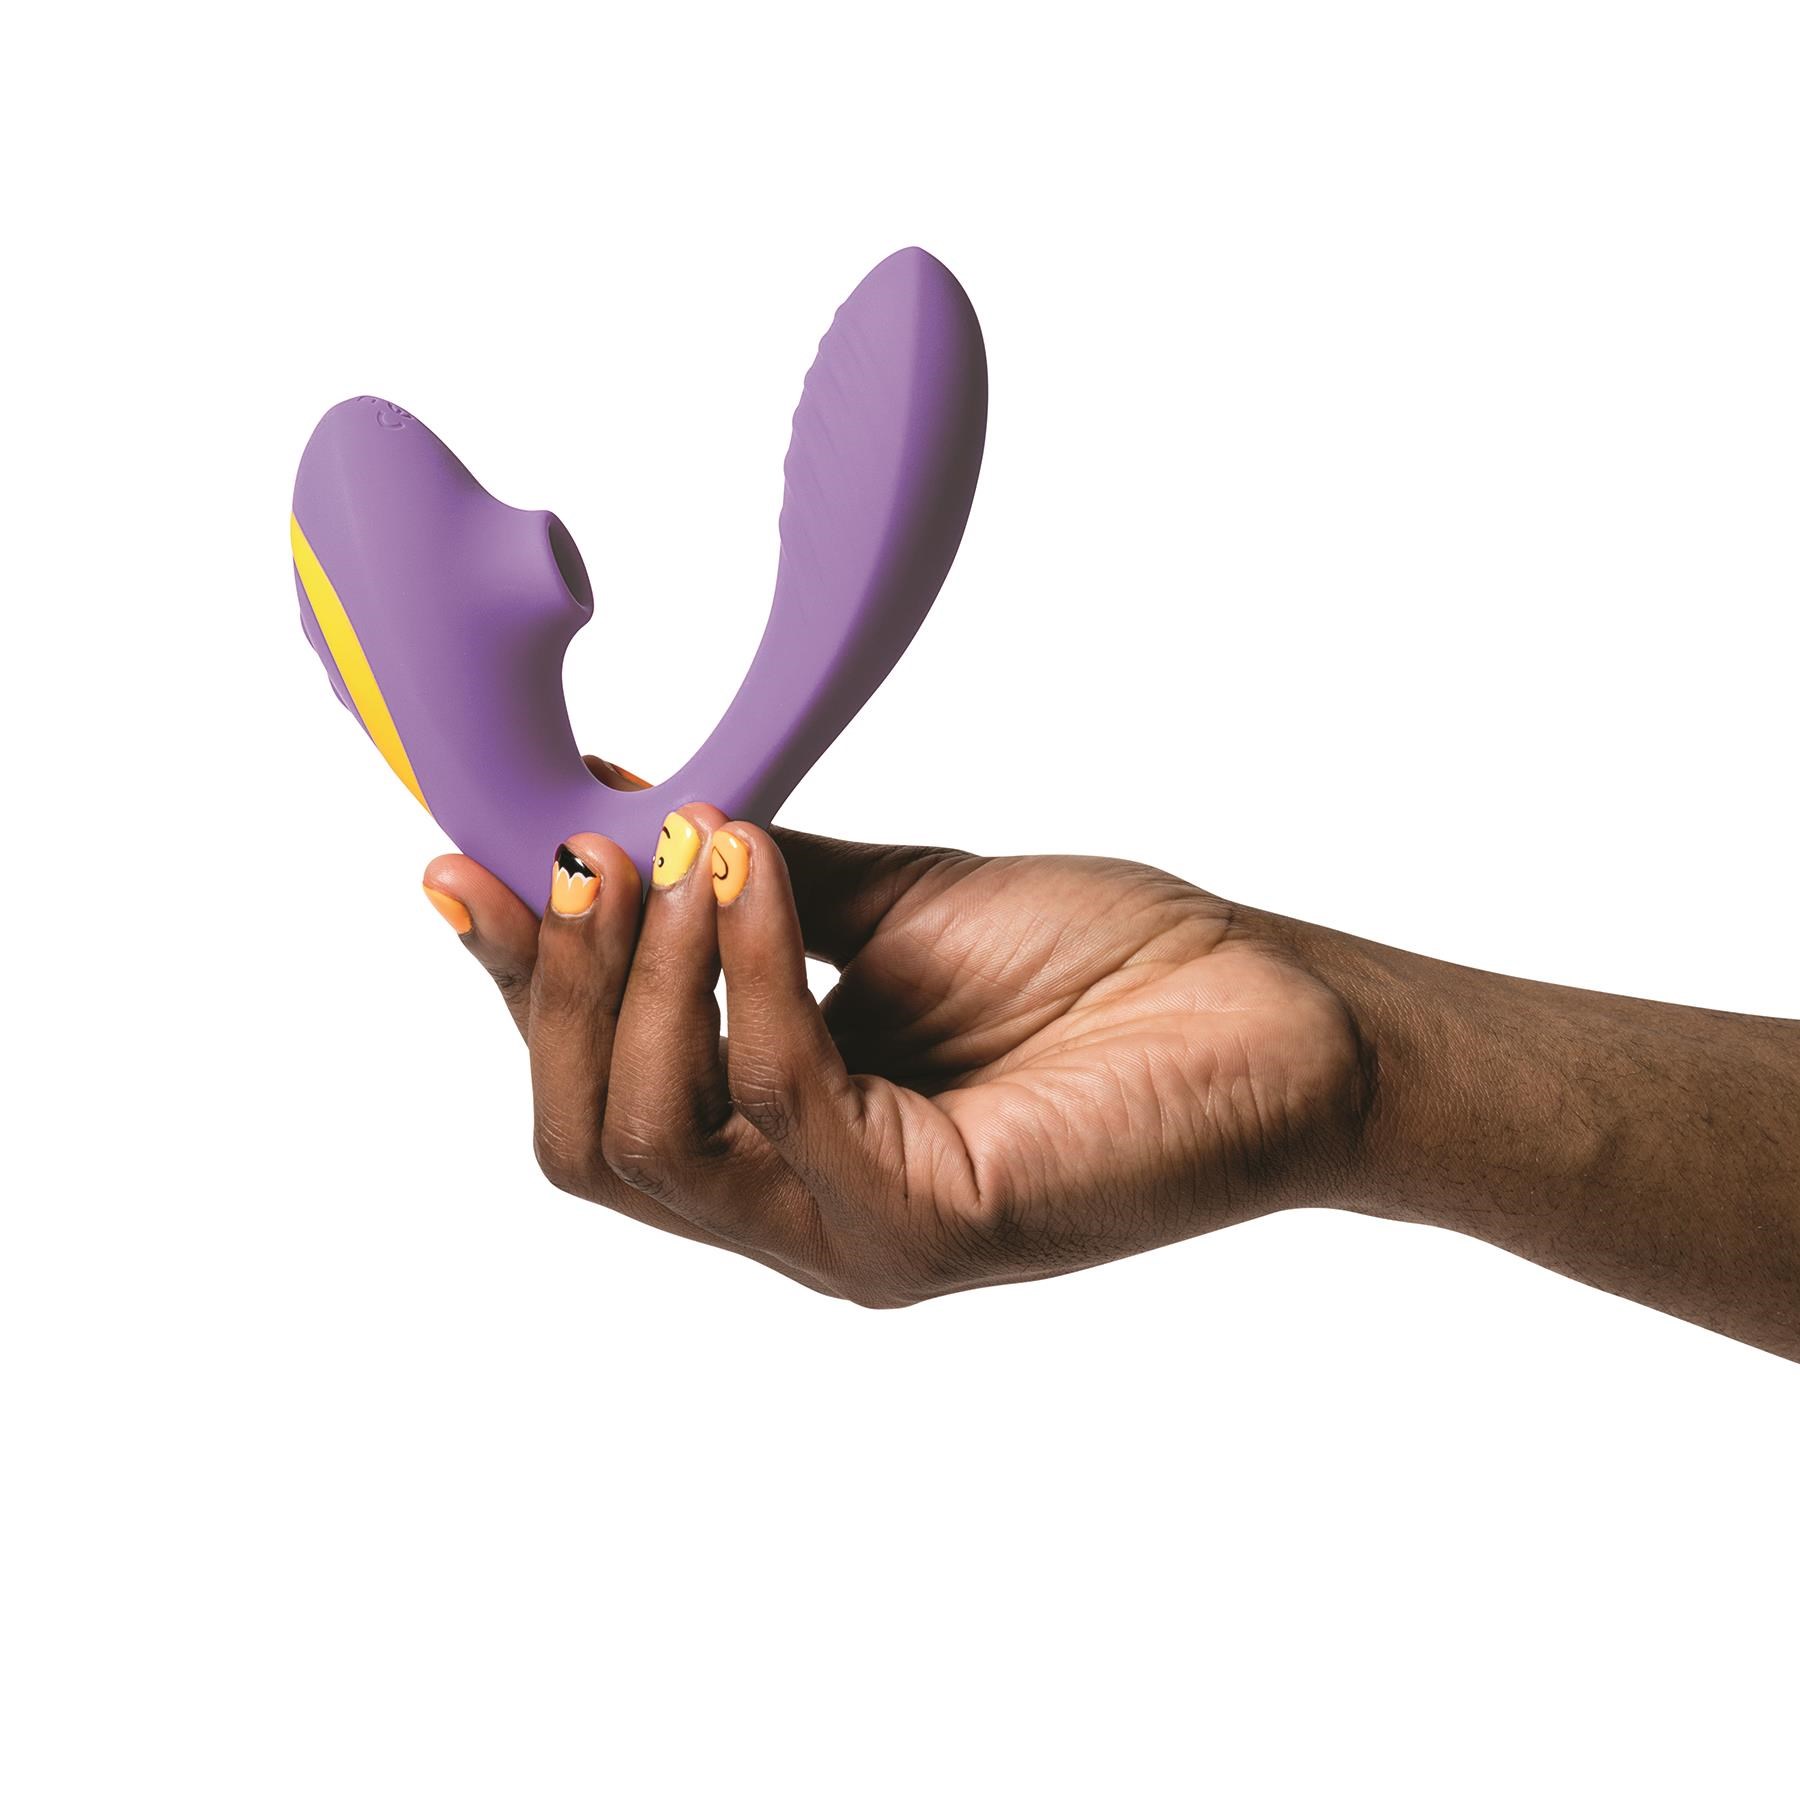 Romp Reverb G-Spot And Clitoral Suction Stimulator - Hand Shot